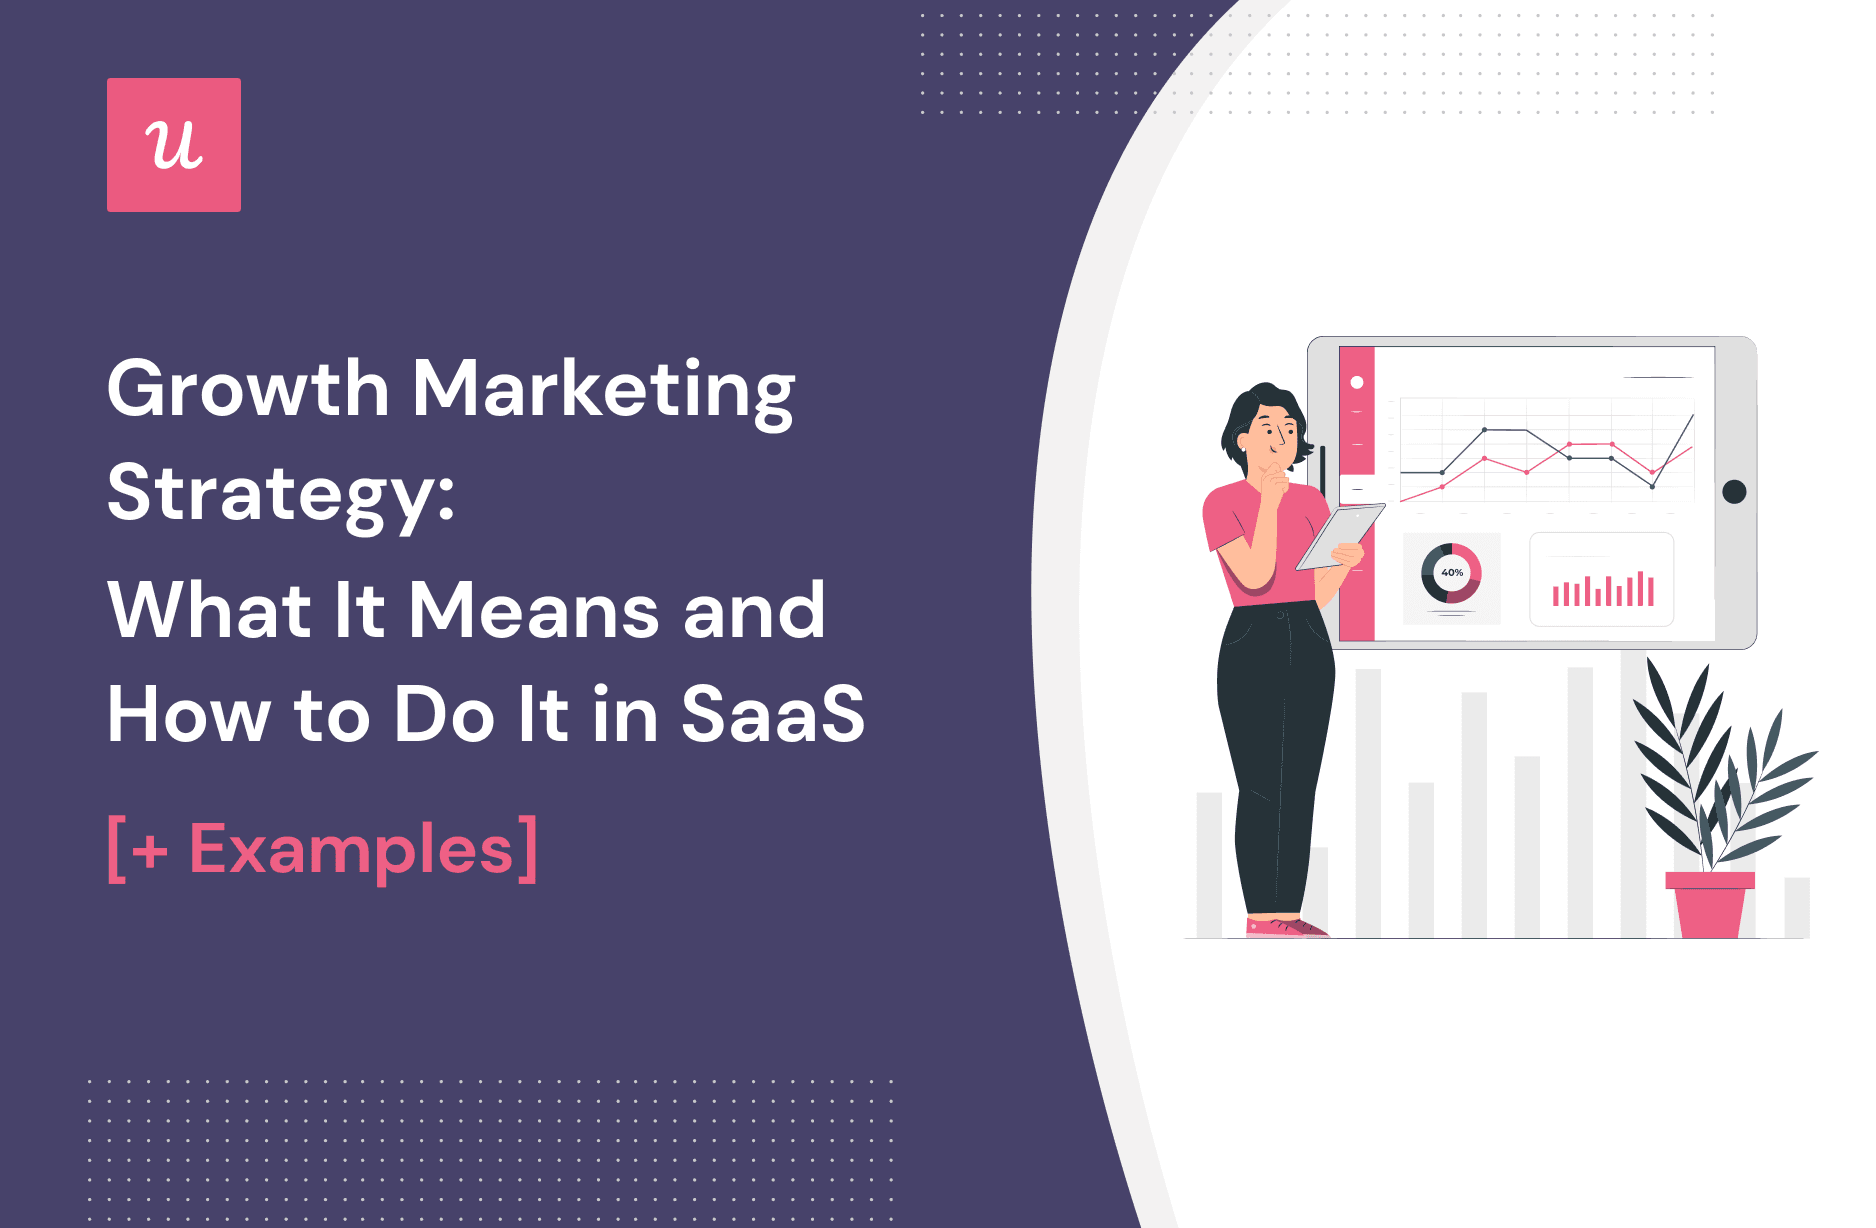 Growth Marketing Strategy: What It Means and How to Do It in SaaS [+ Examples] cover